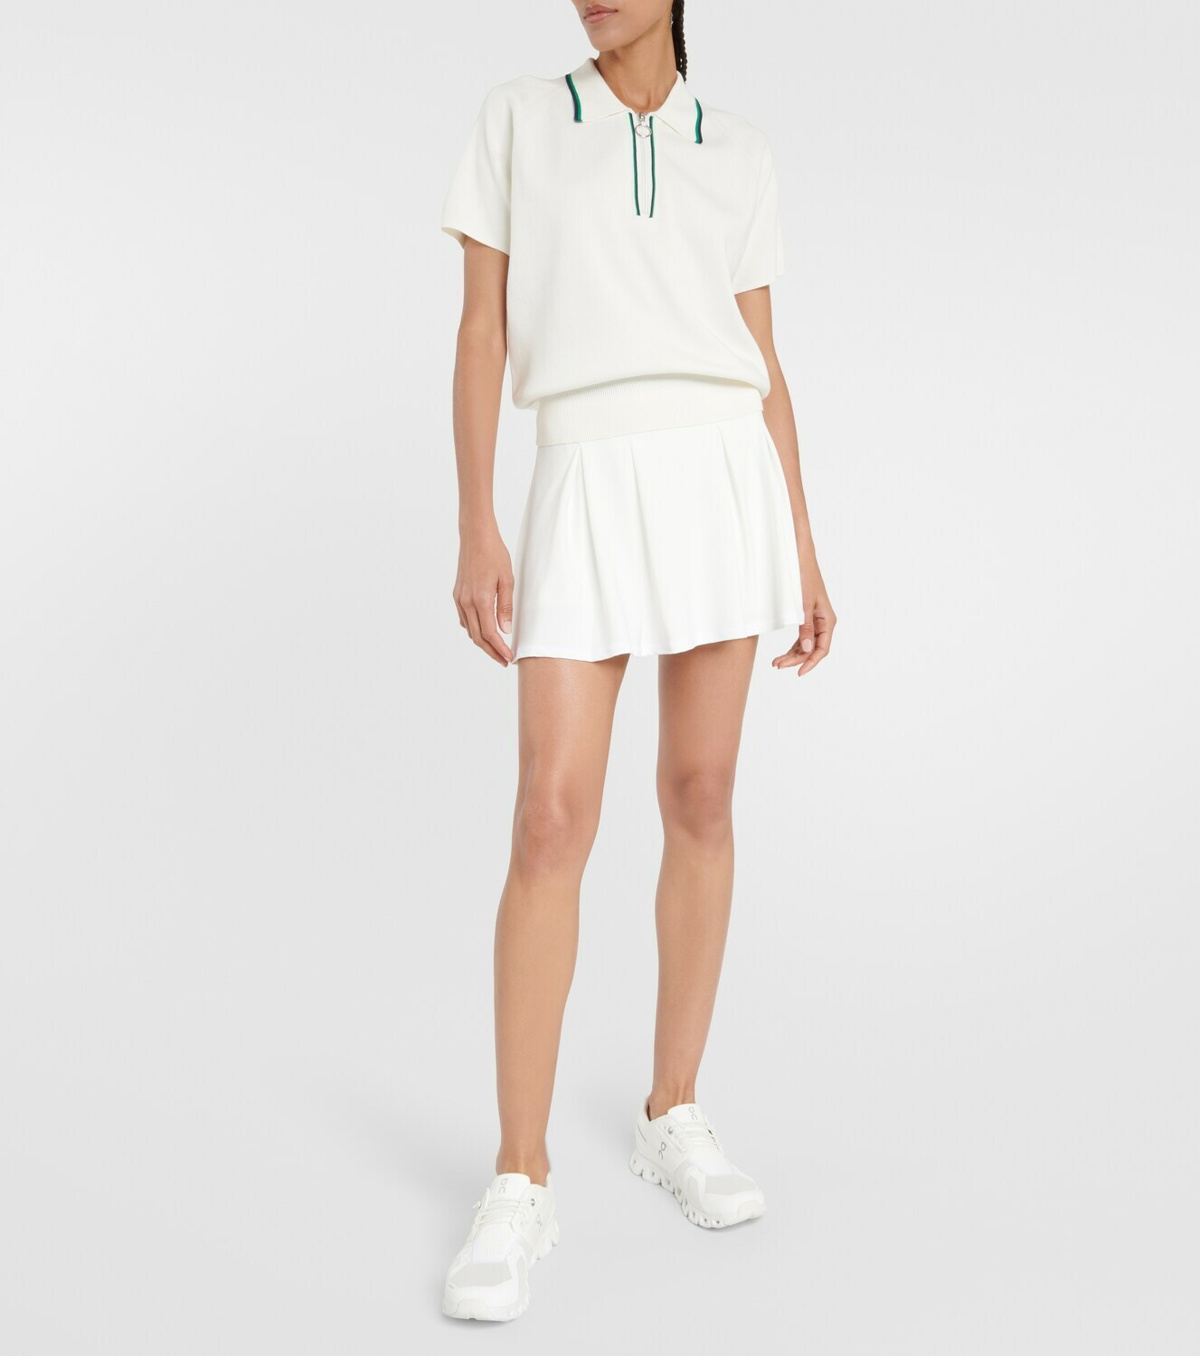 The Upside Topspin Lucinda pleated tennis skirt The Upside